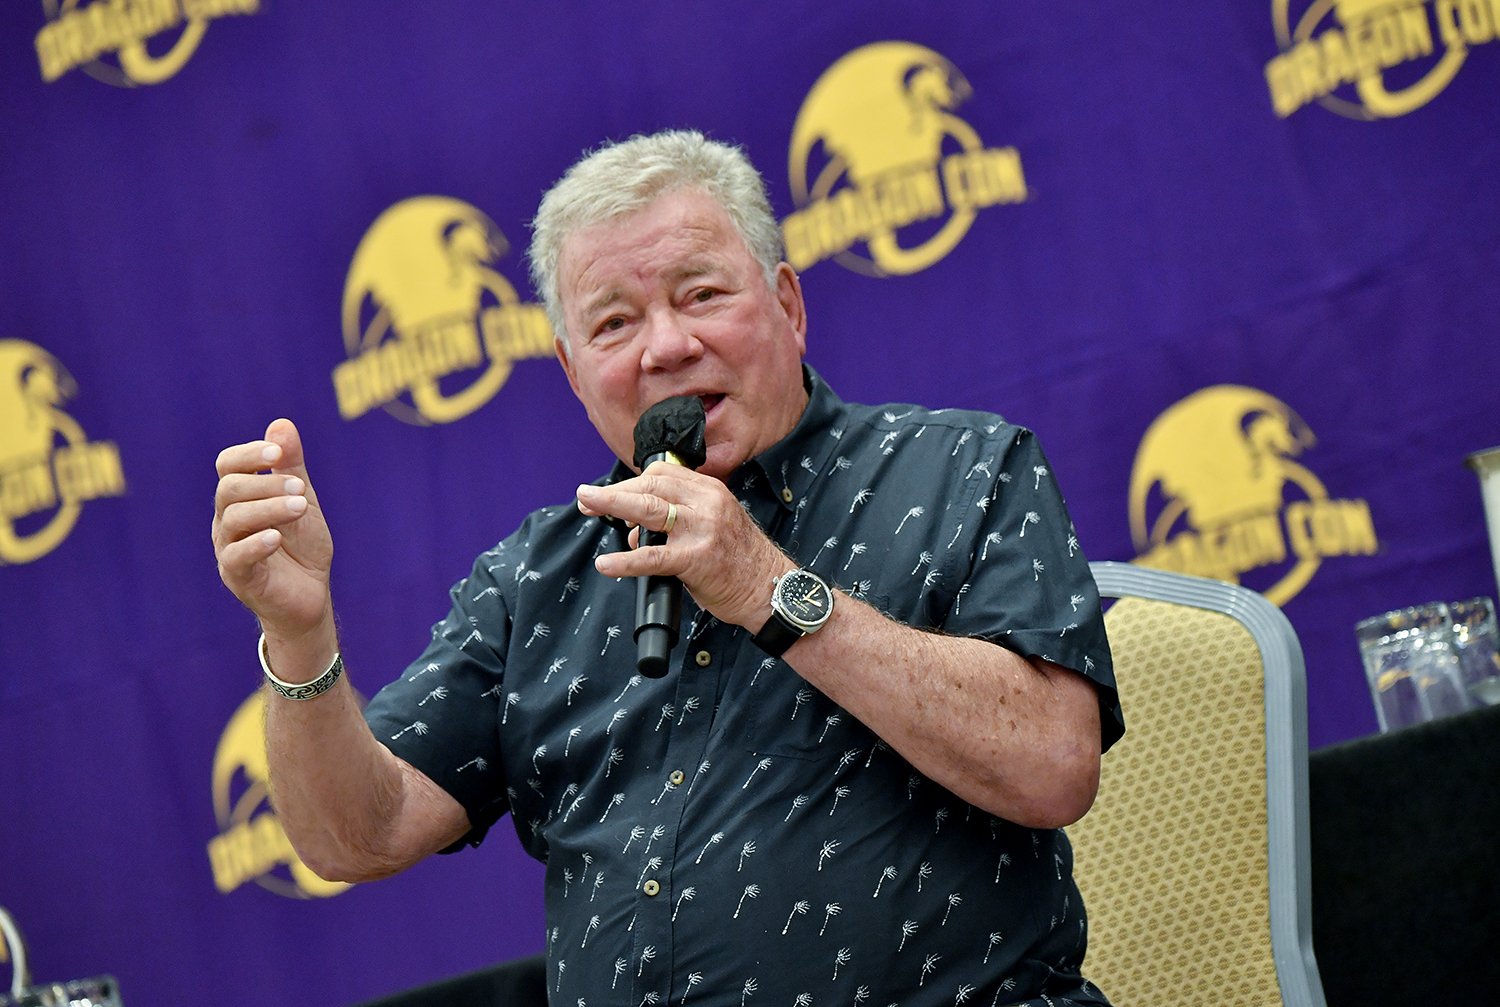 William Shatner, the oldest contestant on The Masked Singer, speaks at 2022 Dragon Con